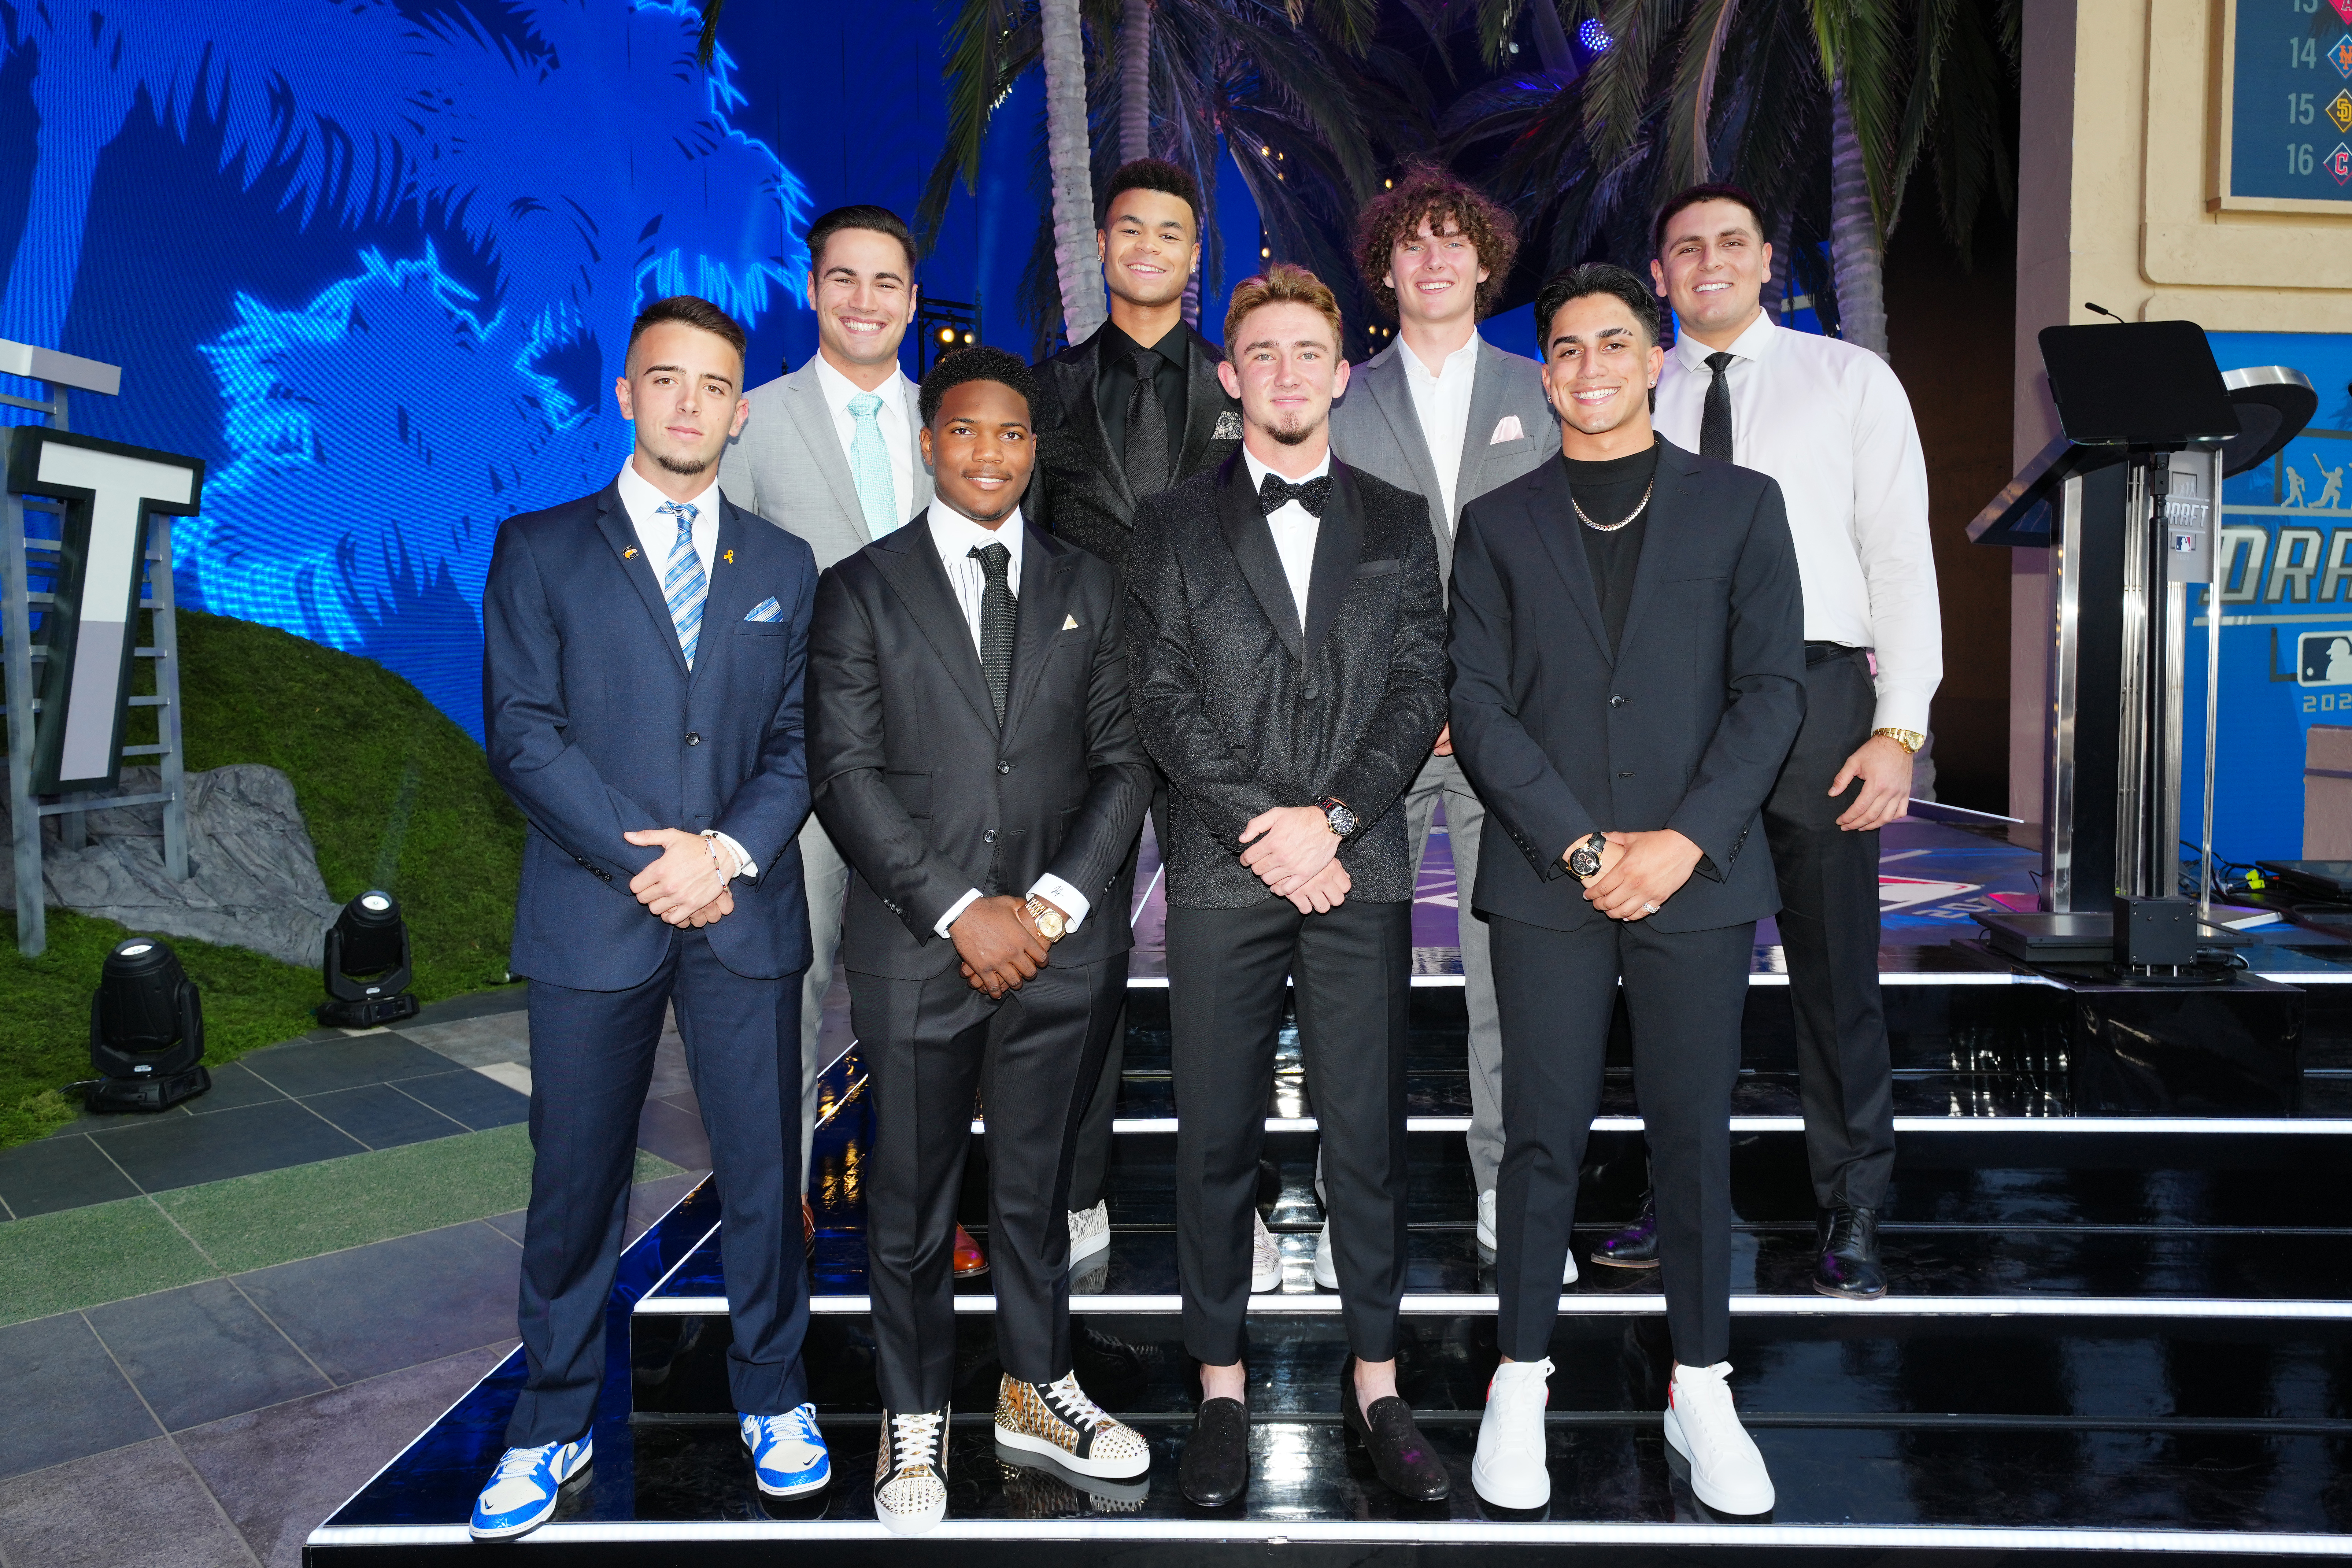 Eight amateur players pose for a photo during the 2022 Major League Baseball Draft at L.A. Live on Sunday, July 17, 2022 in Los Angeles, California.